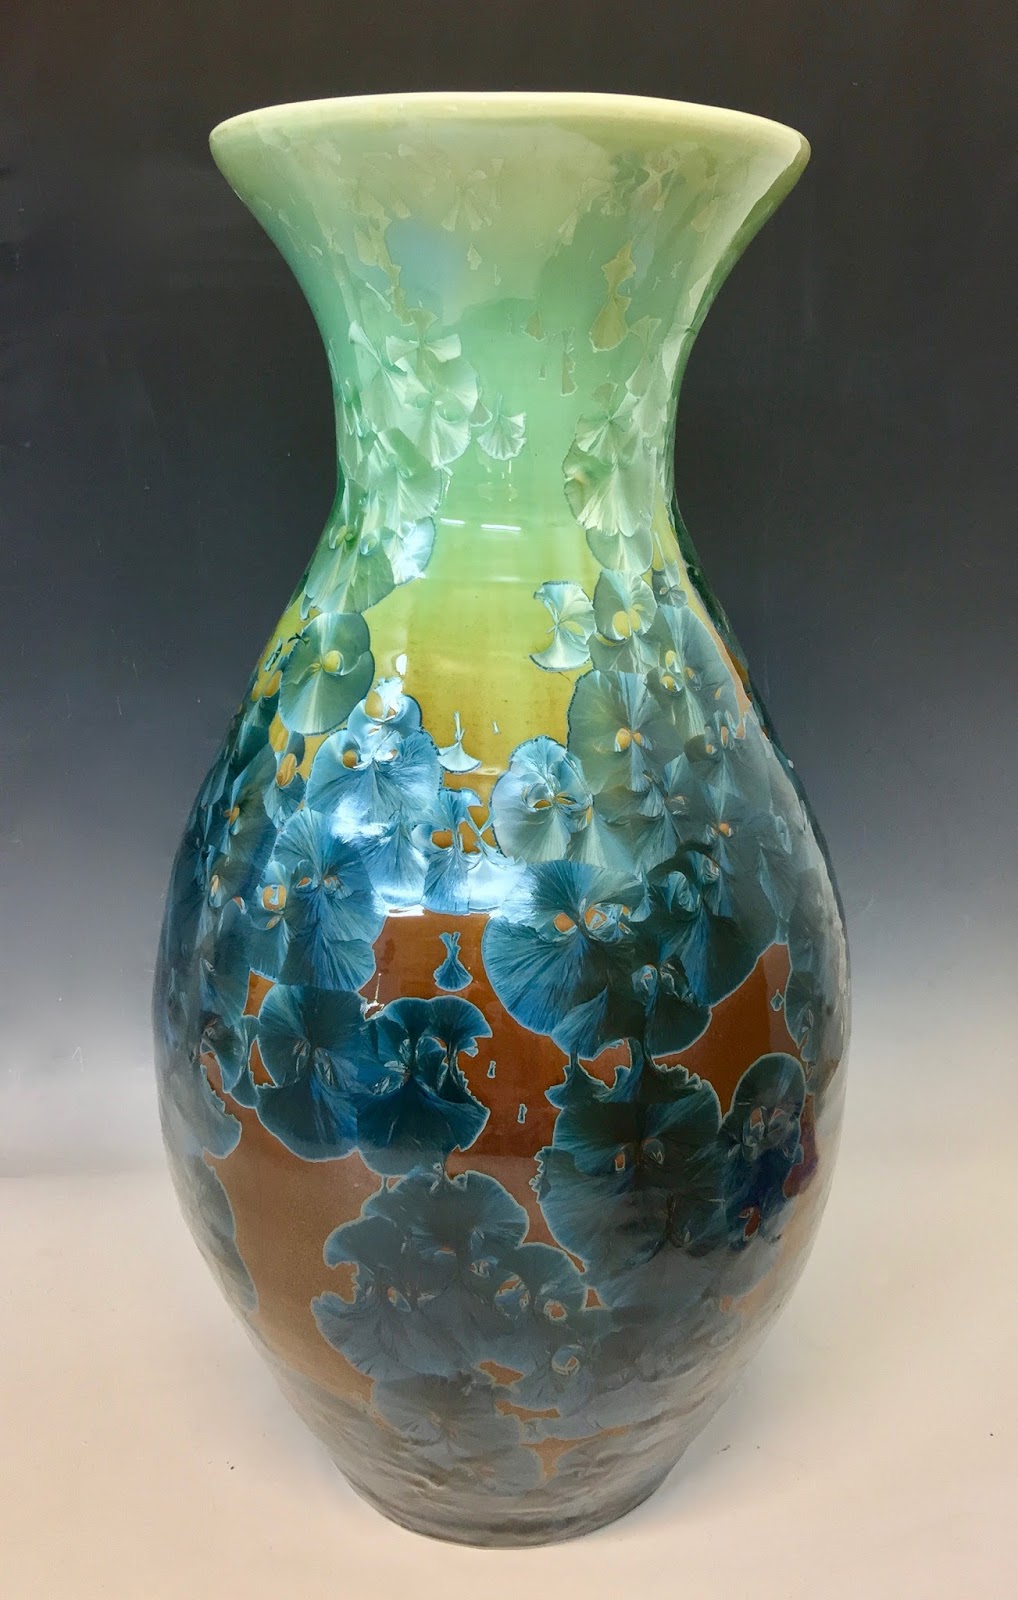 Celtic Pottery | 7711 Oak Valley Ct, Browns Summit, NC 27214 | Phone: (336) 656-1261